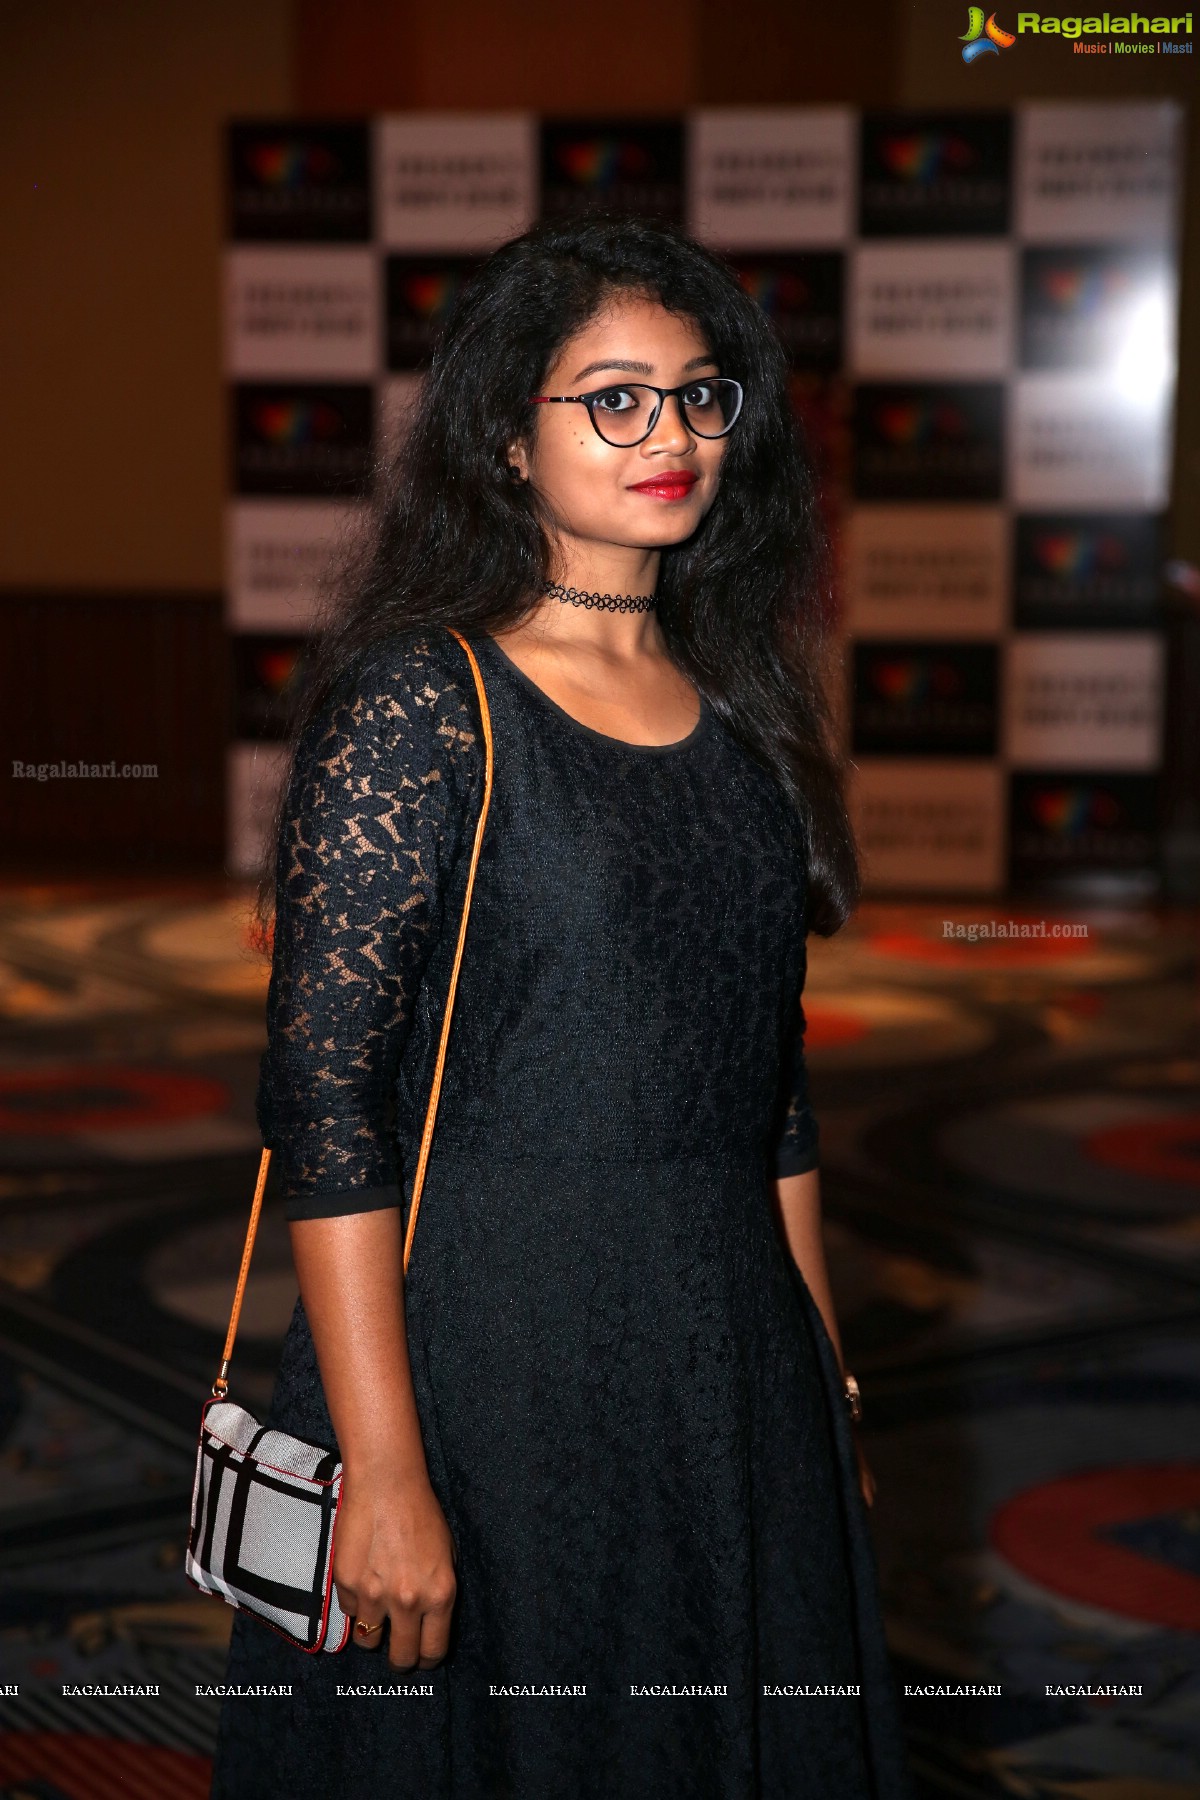 Hamstech Big Bang Fresher's Party 2018 at Marriott Hotel